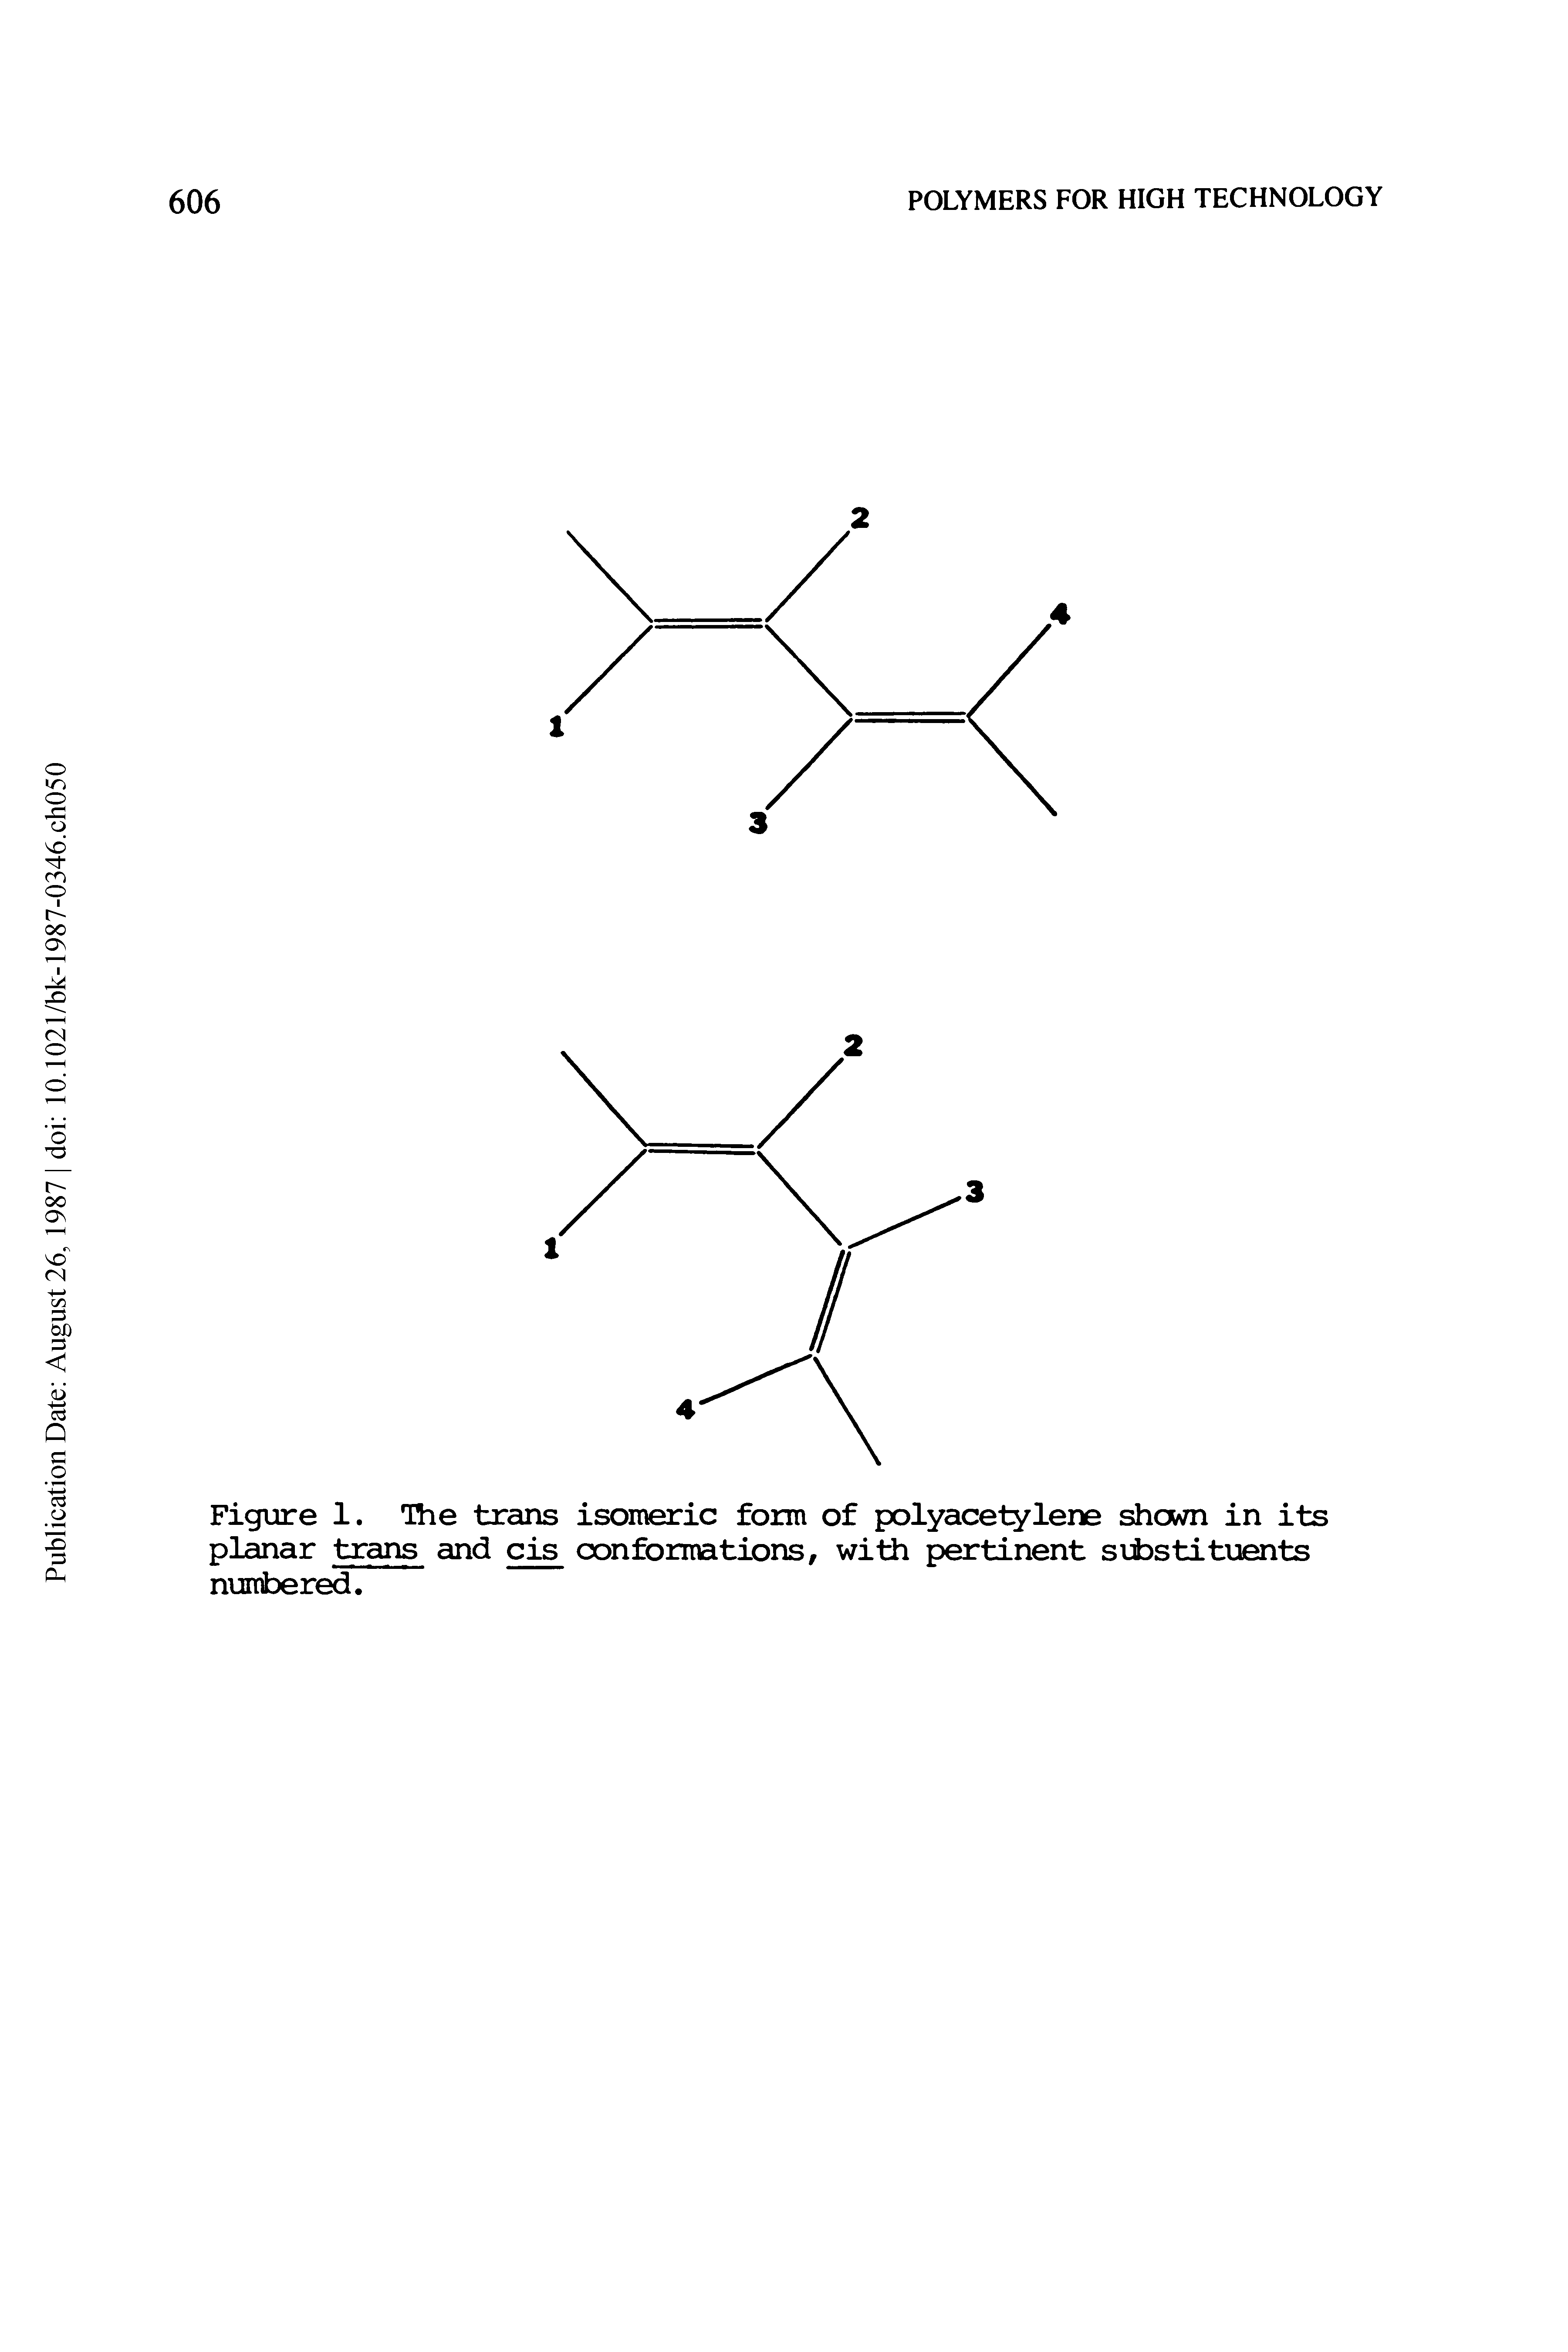 Figure 1. TYie trans isomeric form of polyacetylene shovn in its planar trans and cis conformations, with pertinent si )stituents numbered.